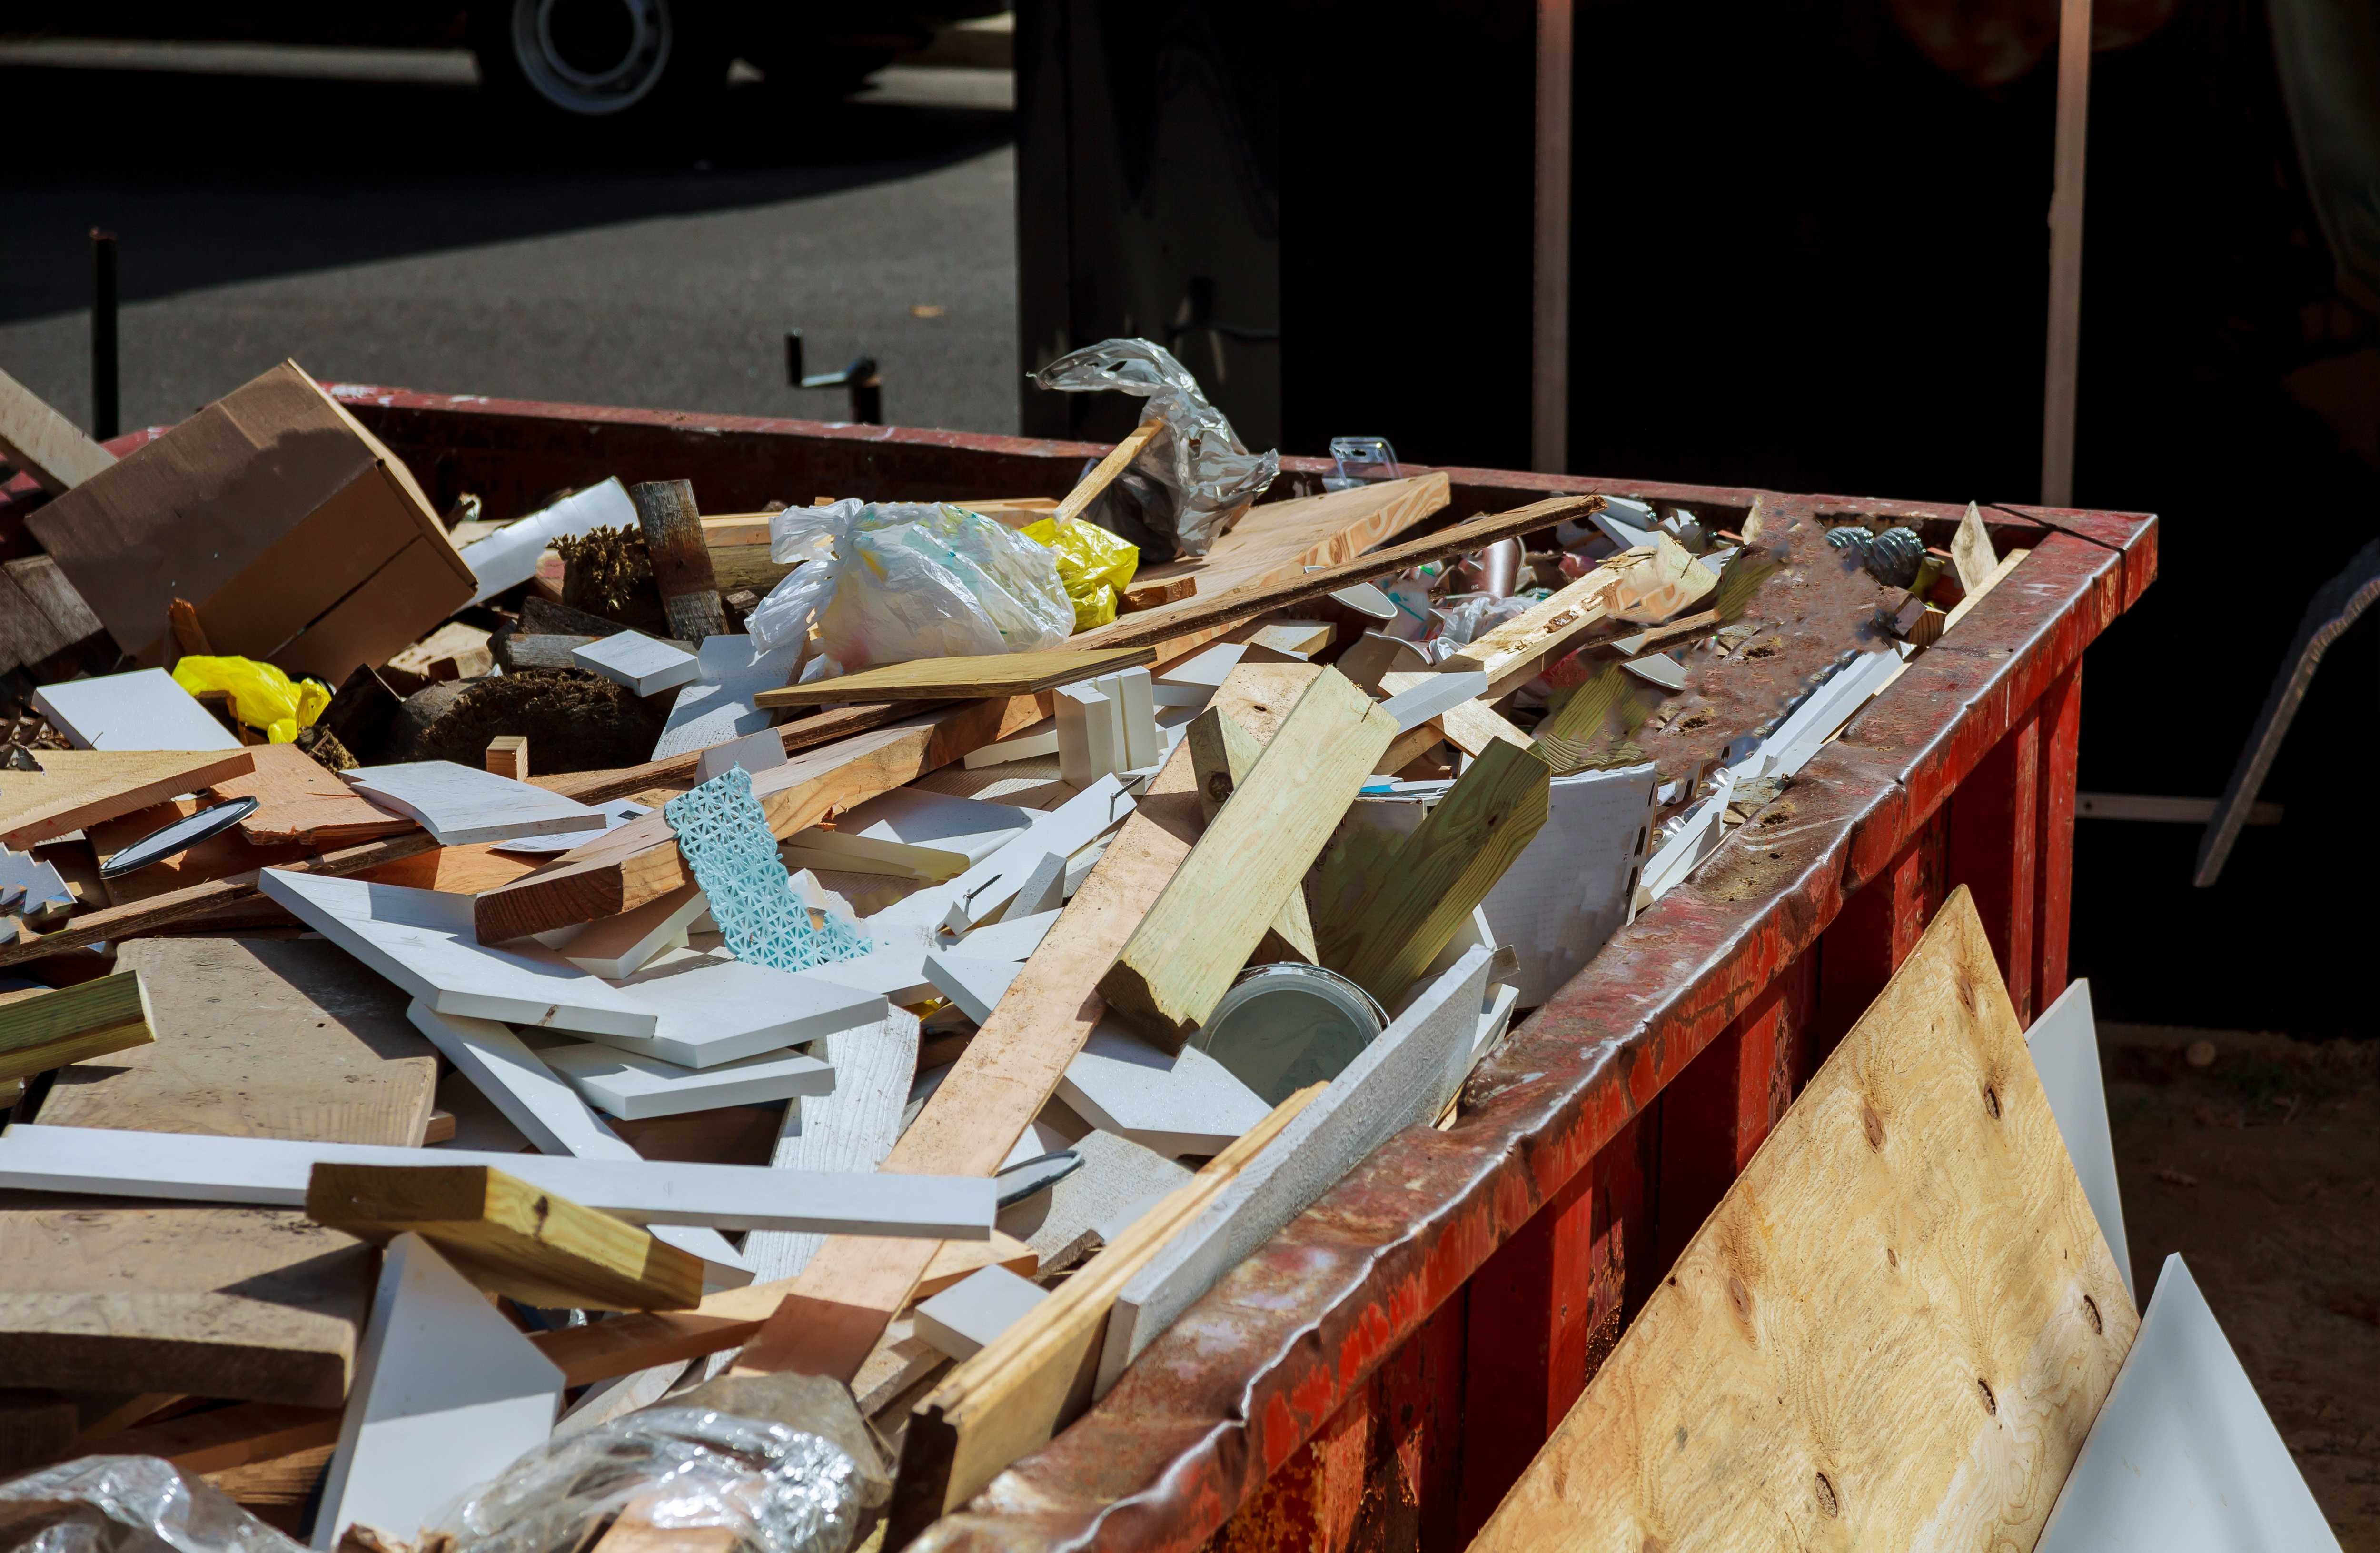 Local Skip Hire Services in Pagewood